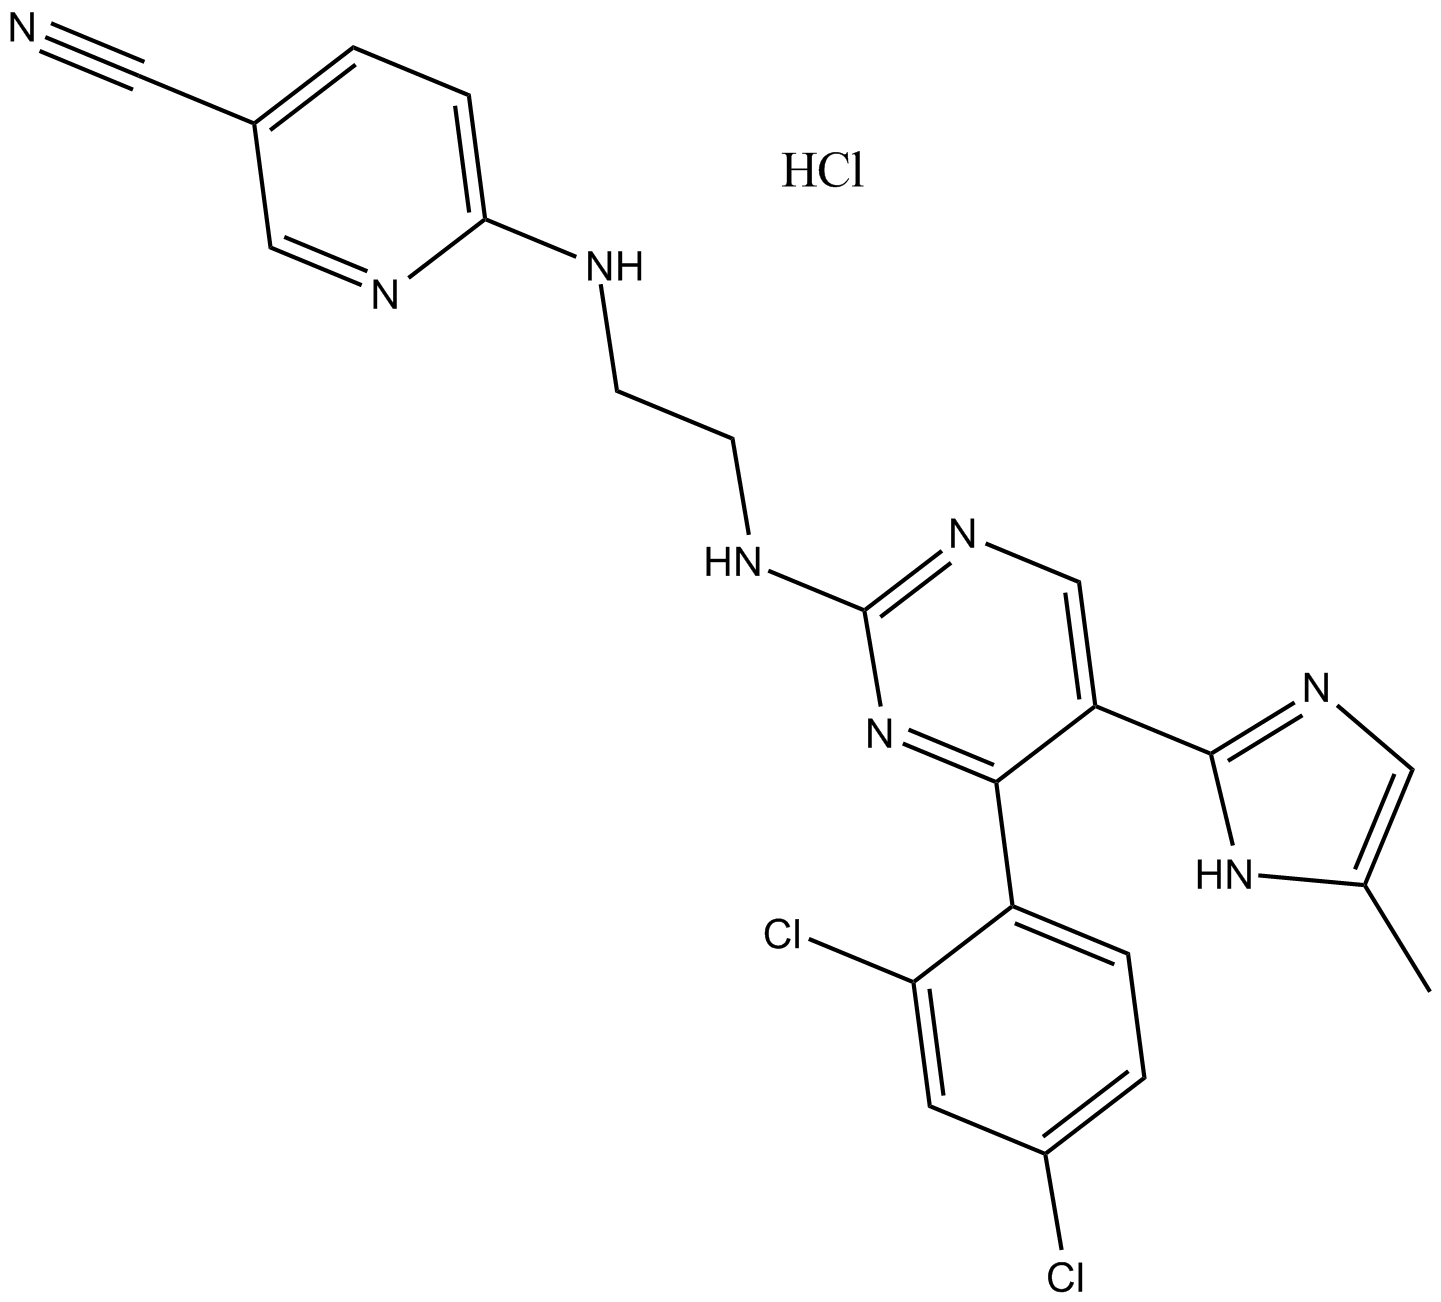 CHIR-99021 (CT99021) HCl  Chemical Structure